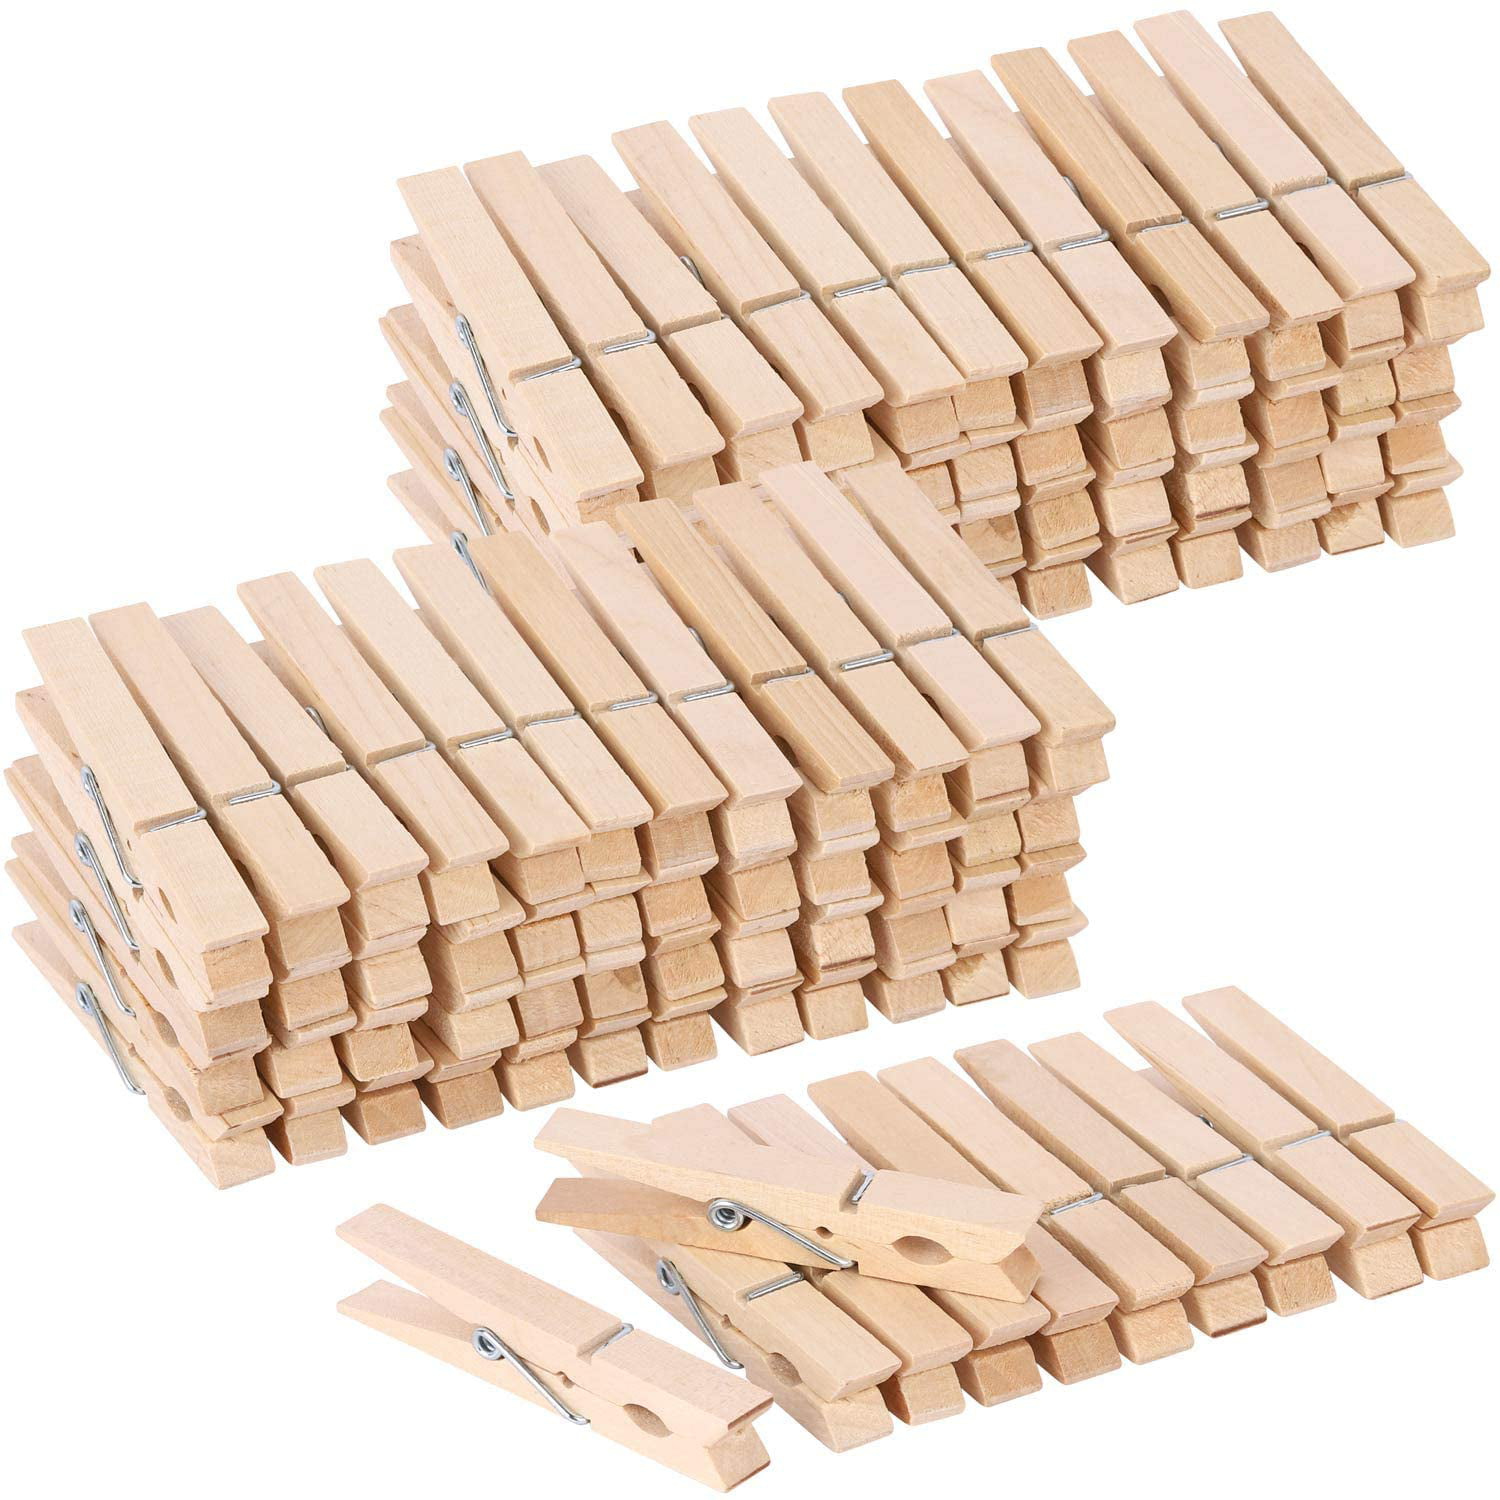 100 Pcs Wood Clothespins Wooden Laundry Clothes Pins Large Spring Regular Size 